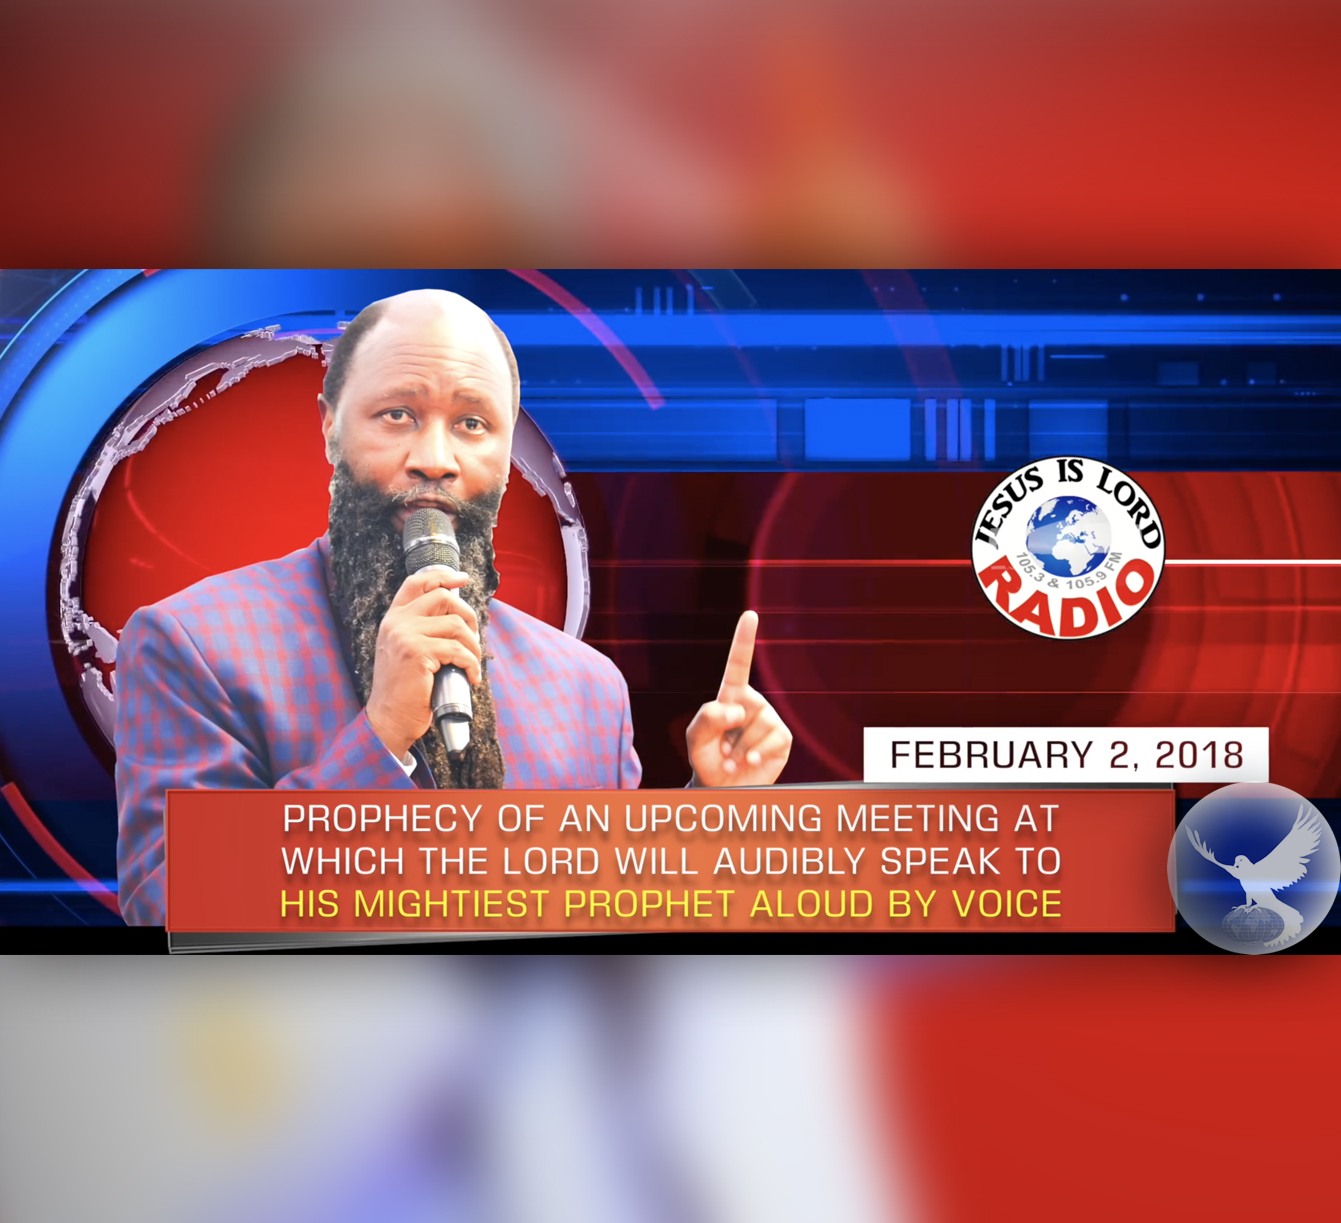 EPISODE 125 - PROPHECY OF AN UPCOMING MEETING AT WHICH THE LORD WILL AUDIBLY SPEAK TO HIS MIGHTIEST PROPHET ALOUD BY VOICE (2FEB2018) - PROPHET DR. OWUOR